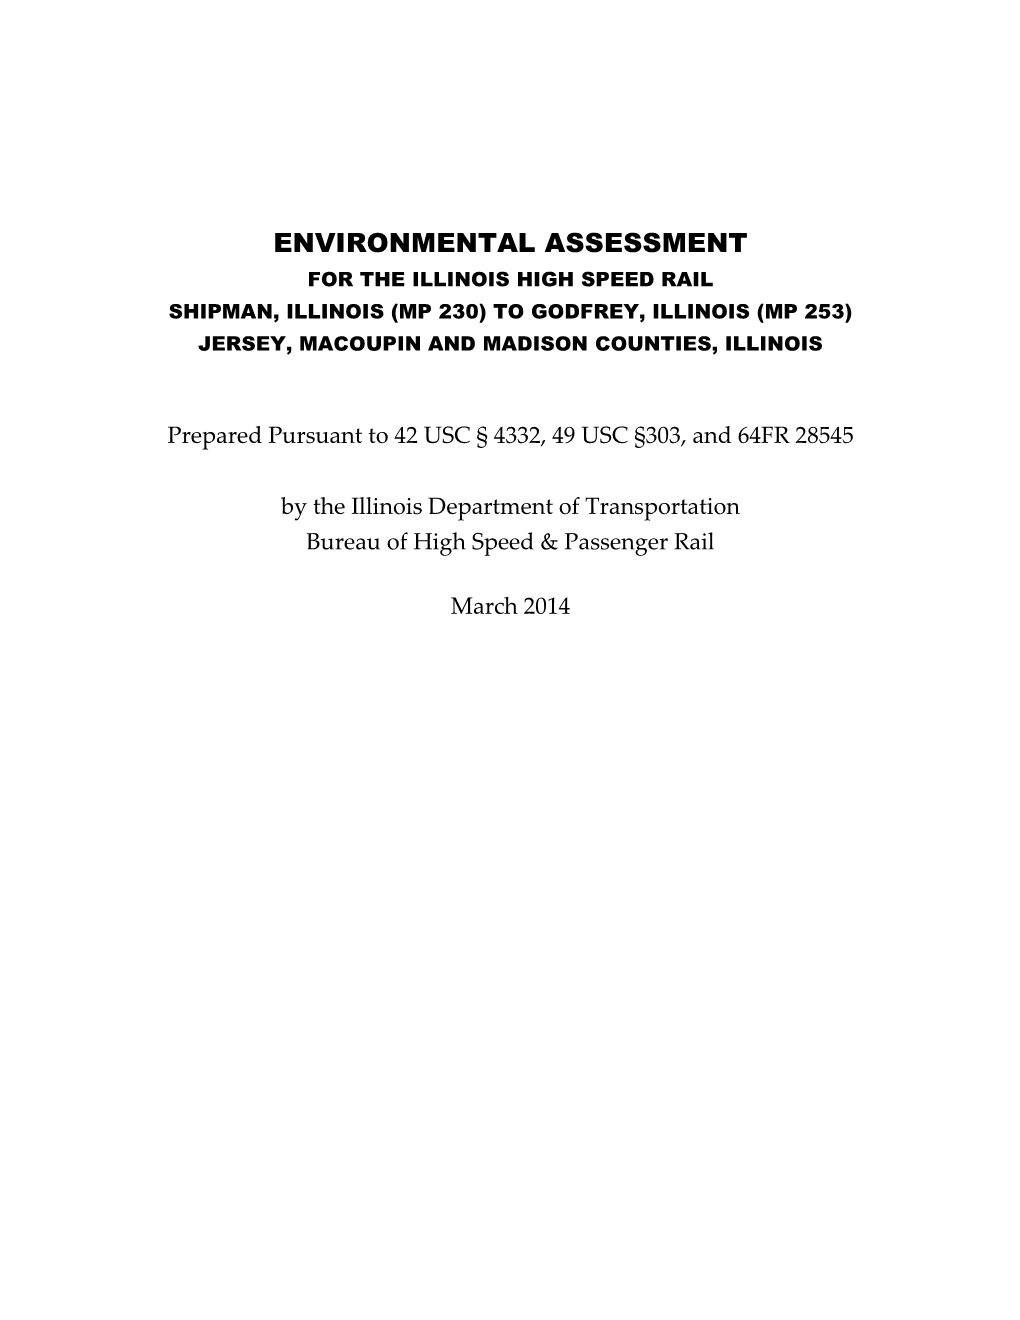 Environmental Assessment for the Illinois High Speed Rail Shipman, Illinois (Mp 230) to Godfrey, Illinois (Mp 253) Jersey, Macoupin and Madison Counties, Illinois